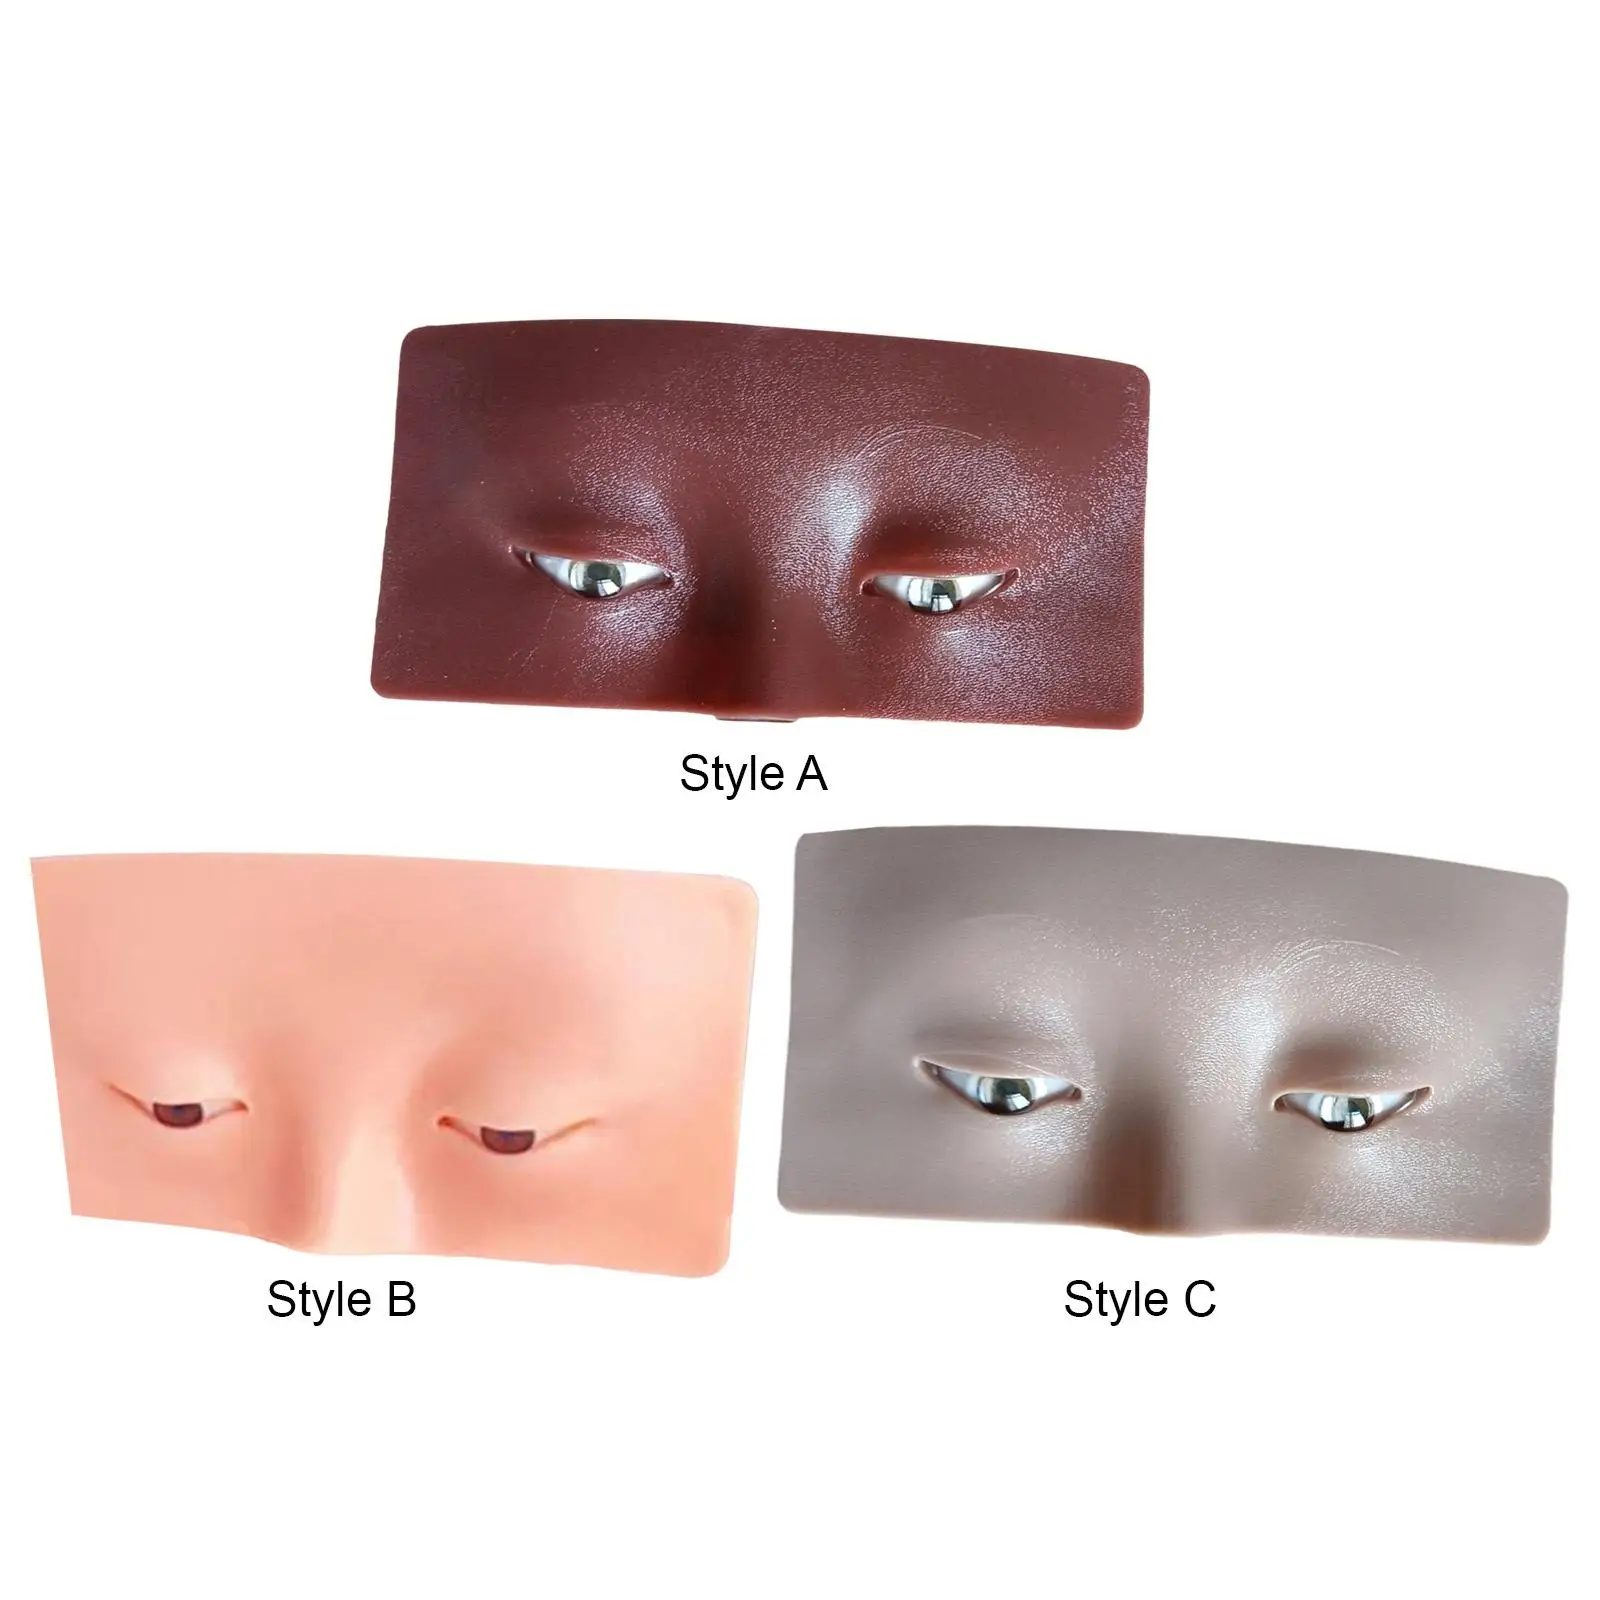 Eye Makeup Practice Face Salon Home Use 17x9cm Reusable Easy to Use Accessories for Makeup Training Professional Makeup Artists